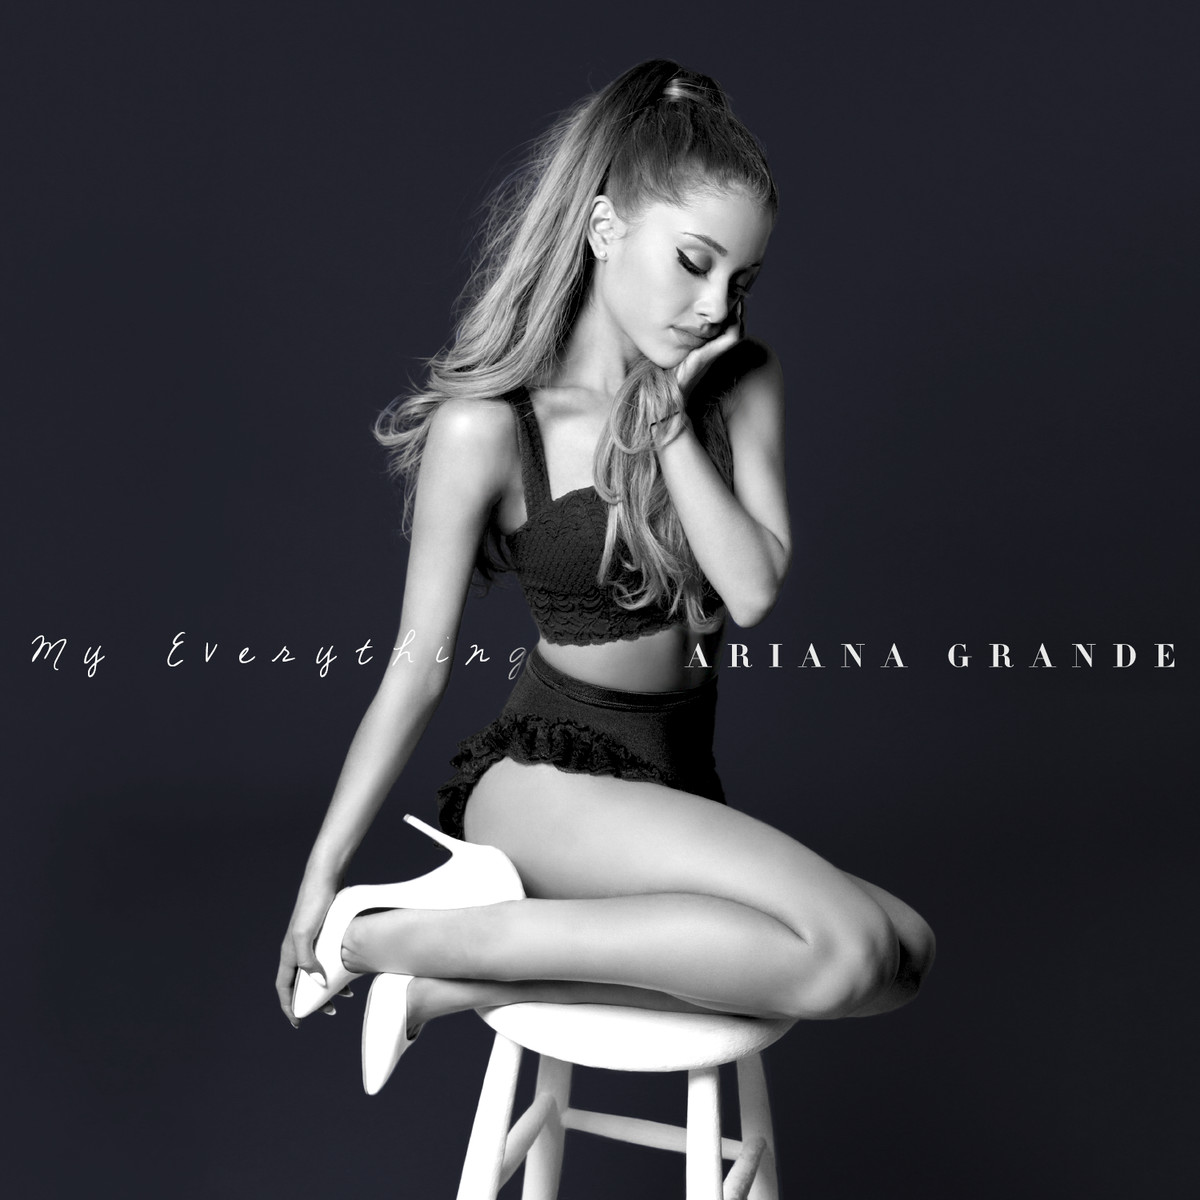 Ariana-Grande-My-Everything-Deluxe-2014-1200x1200